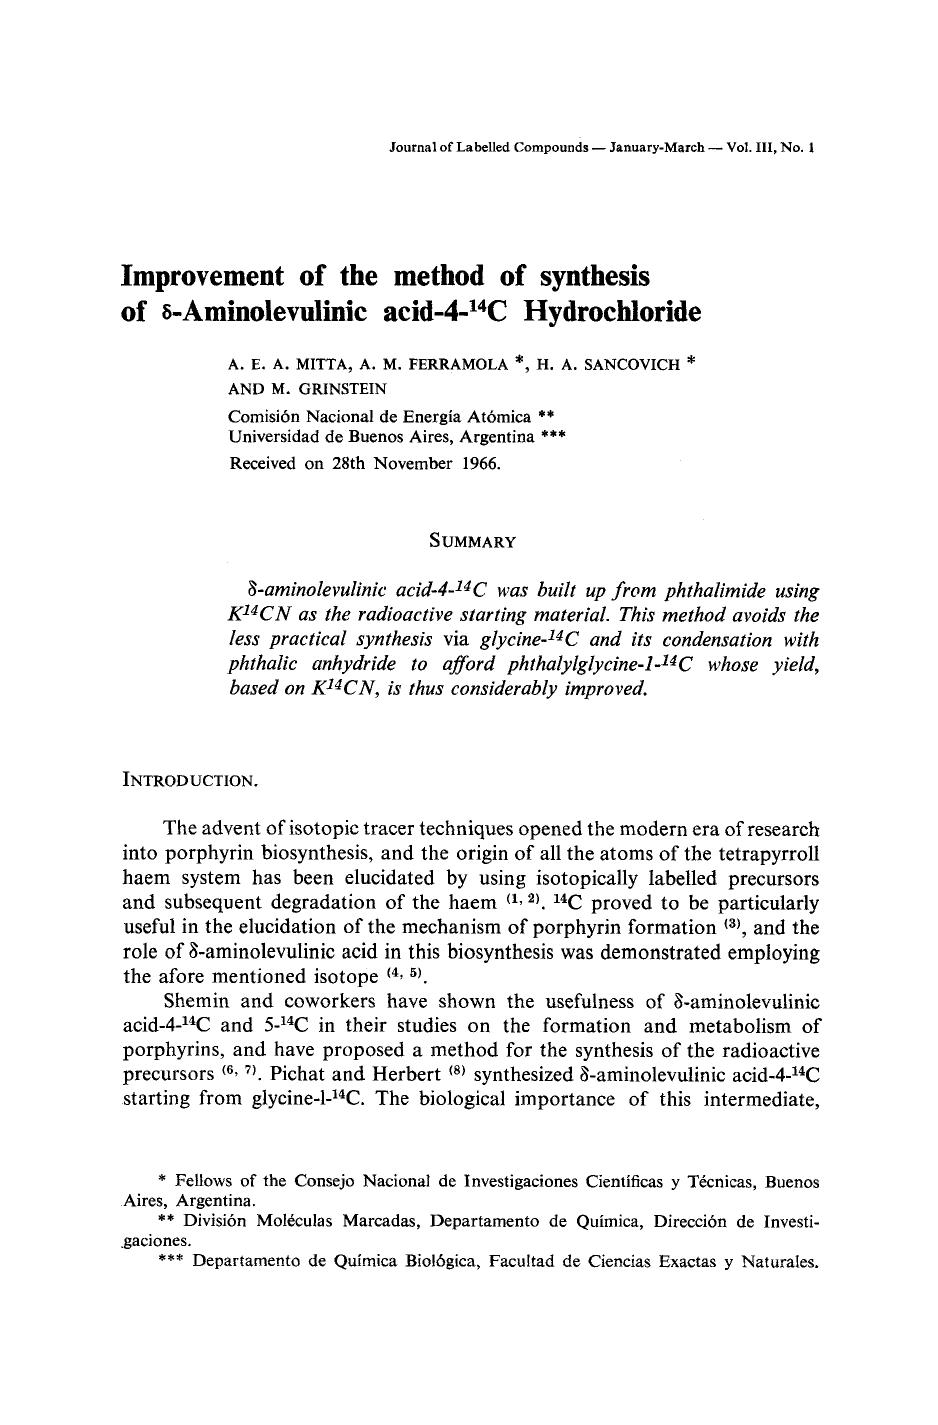 Improvement of the method of synthesis of [delta]-Aminolevulinic acid-4-14C hydrochloride by Unknown